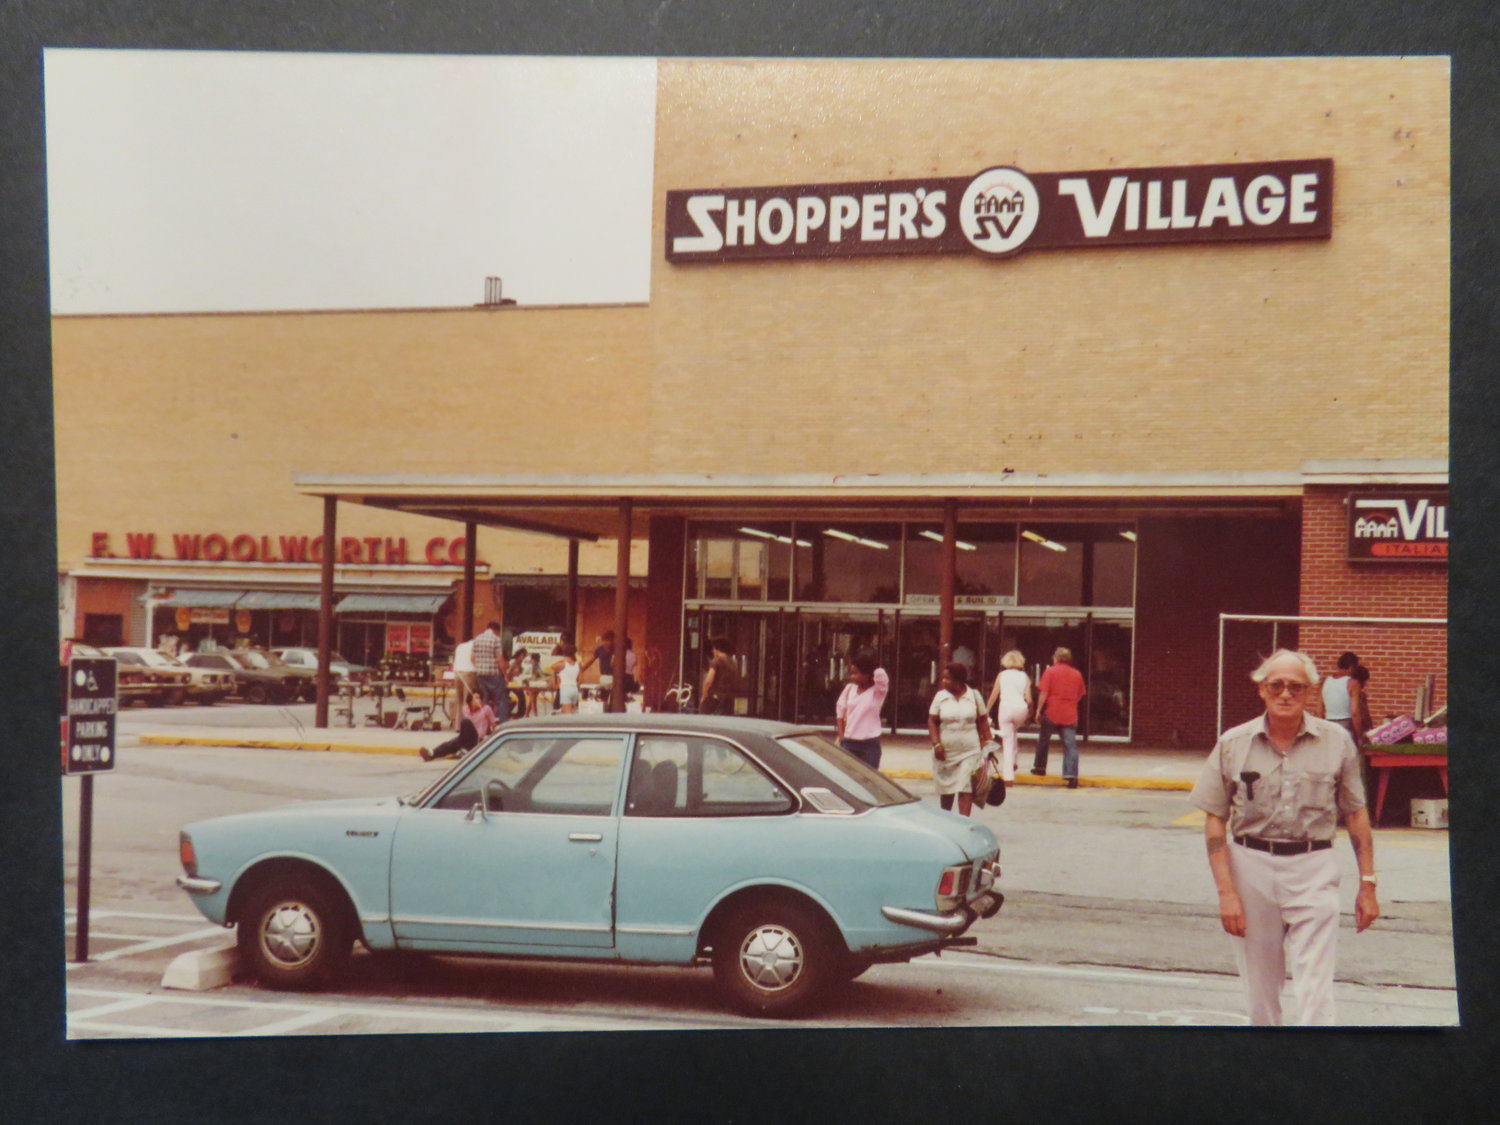 In 1980, Shopper’s Village, which is fondly remembered in West Hempstead history for the “Pickle Man” and the “Dollhouse Shoppe,” took over the location.